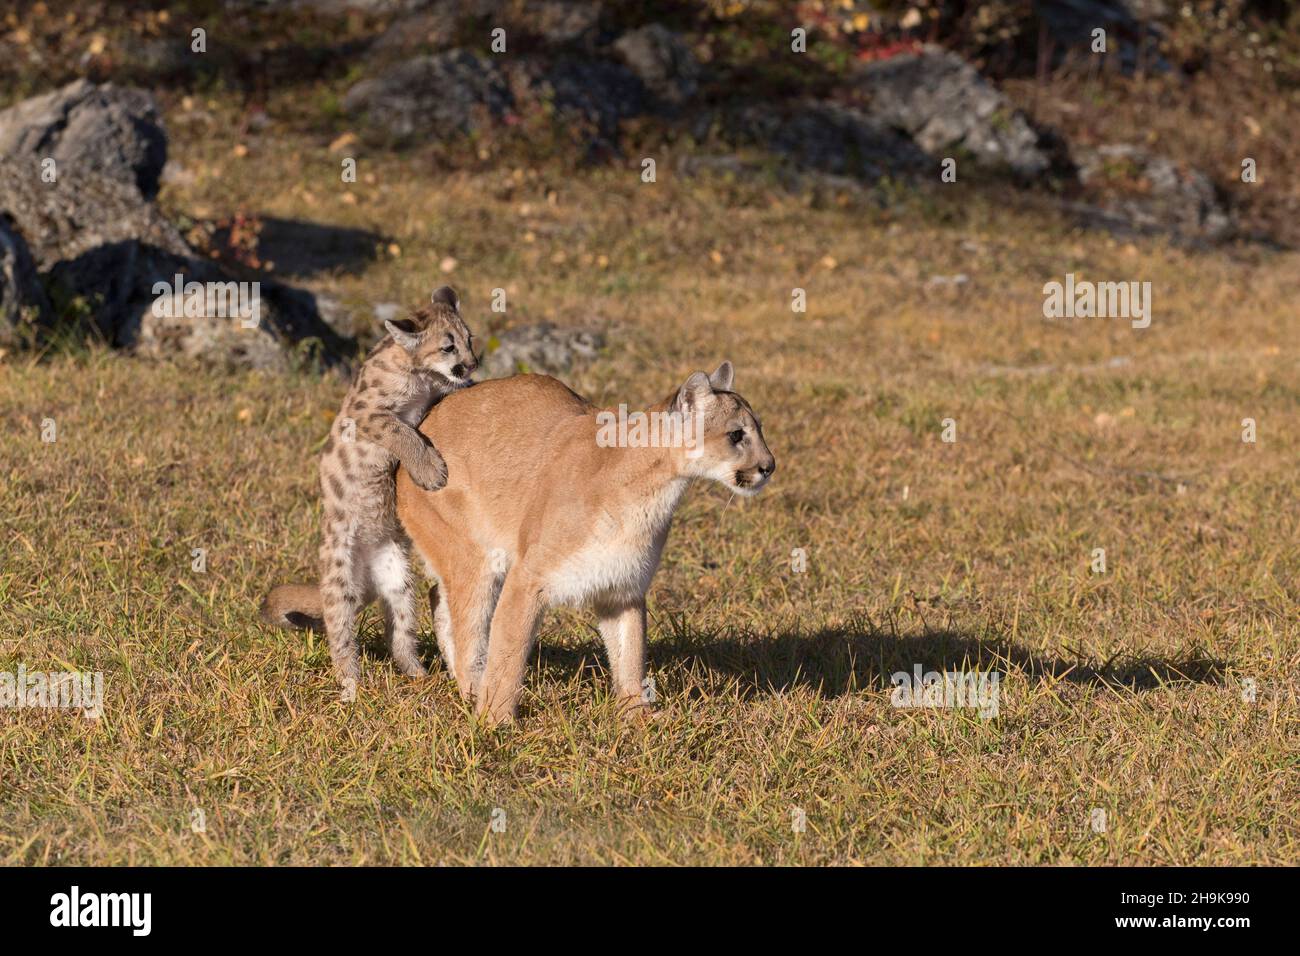 Puma (Felis concolor) cub jumping on adult female, Montana, USA, October, controlled conditions Stock Photo